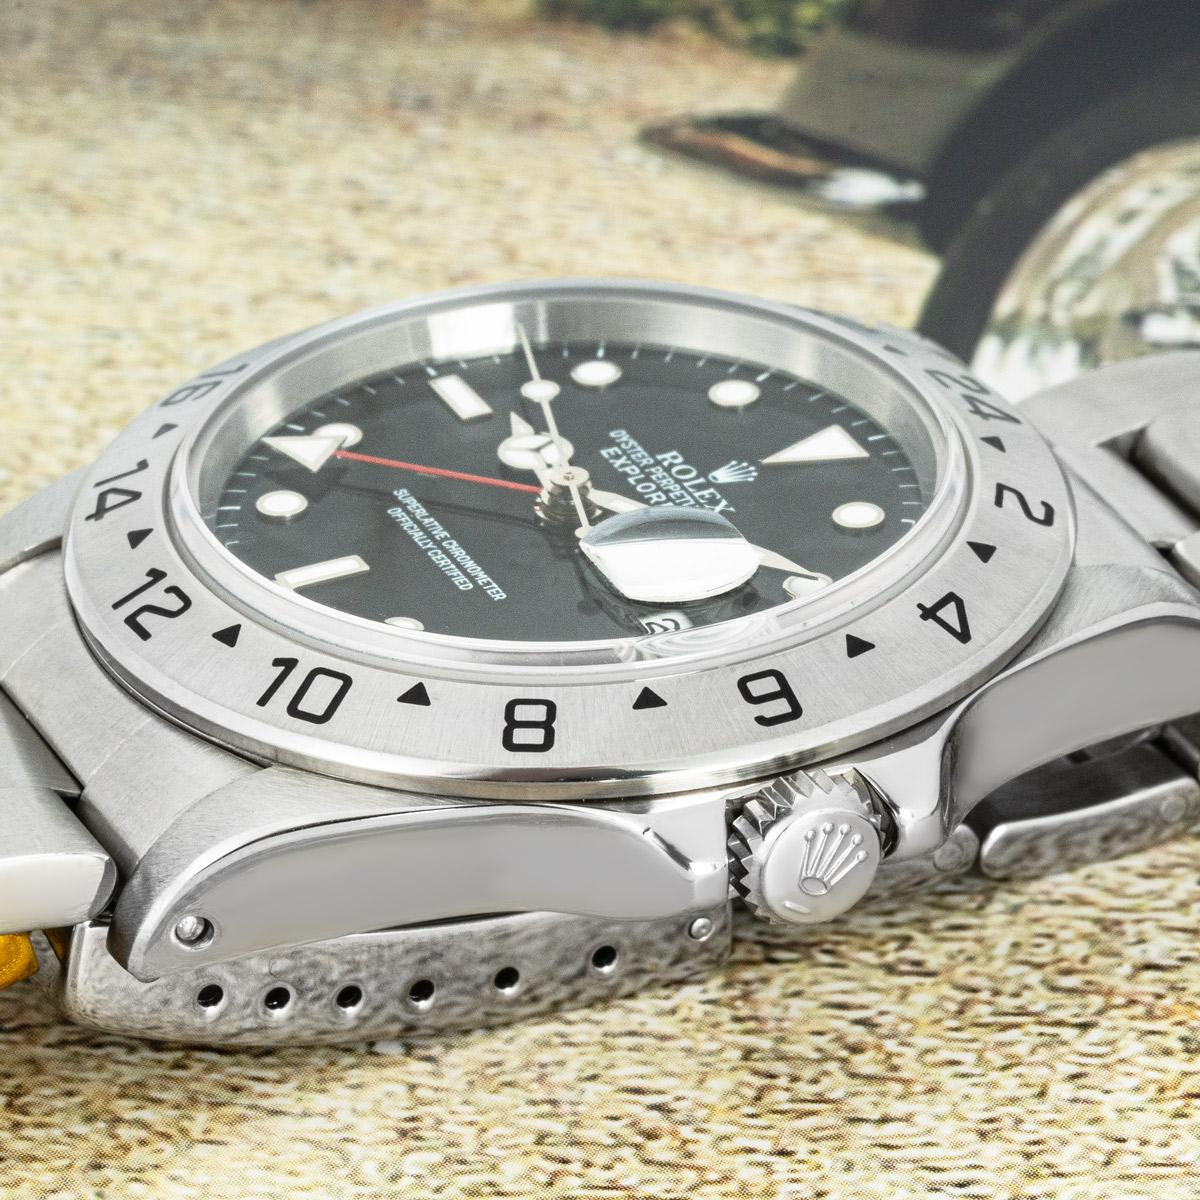 An Explorer II by Rolex in steel. Features a black dial with a date aperture, a red 24-hour hand and a stainless steel fixed bezel set with a 24-hour display. The watch is fitted with a sapphire glass, a self-winding automatic movement and a steel